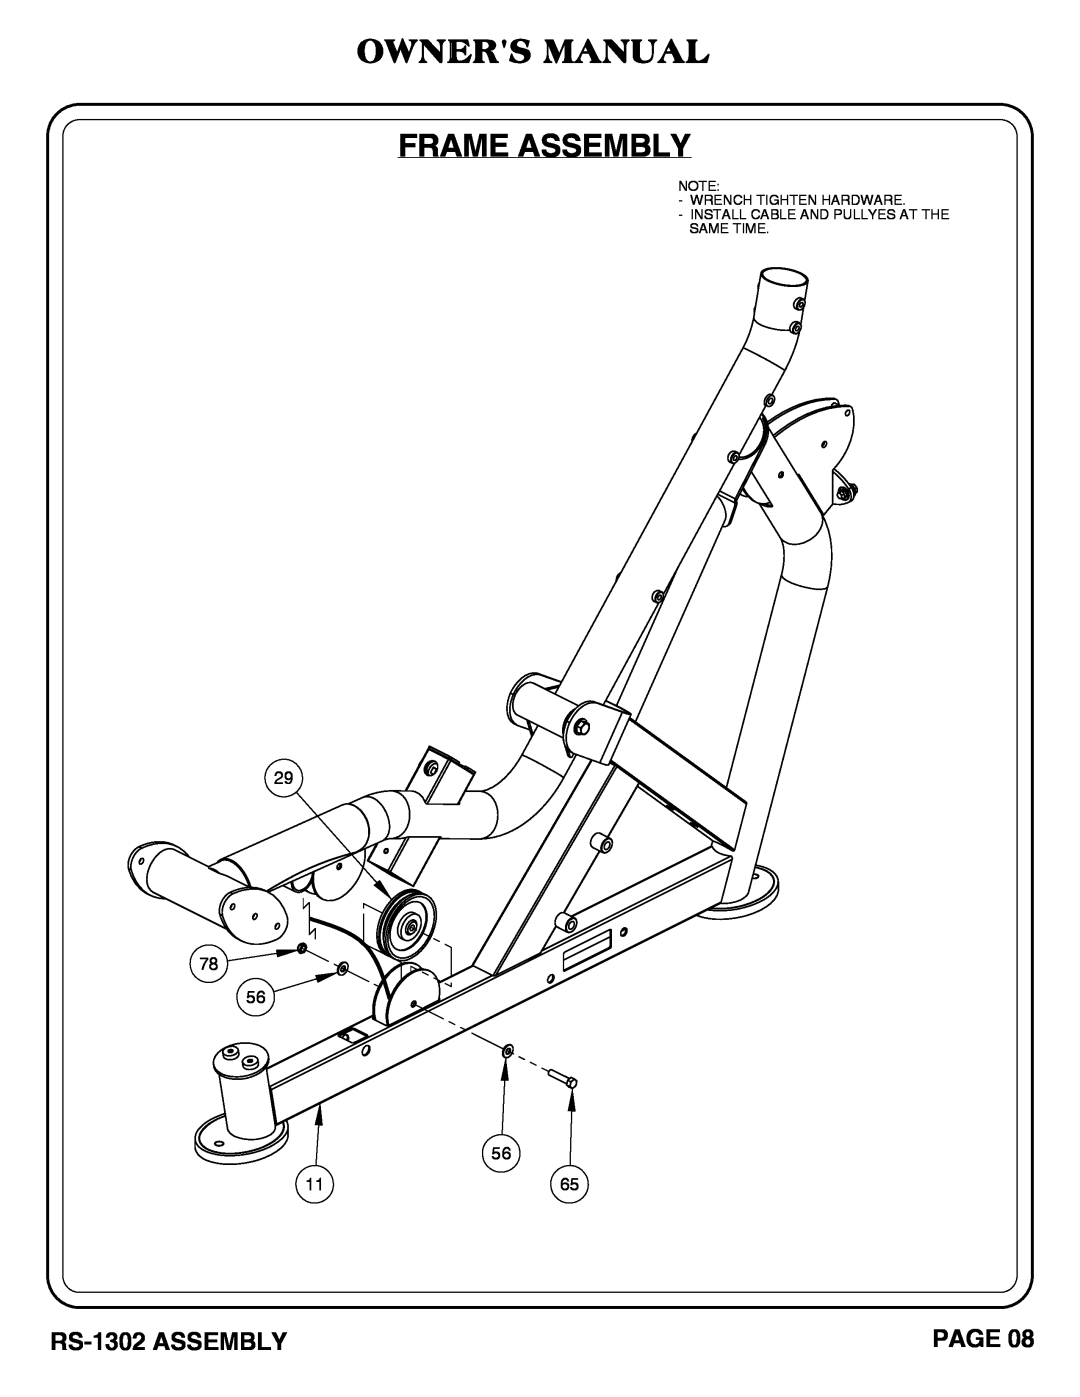 Hoist Fitness RS-1302 owner manual Owners Manual Frame Assembly, Page 